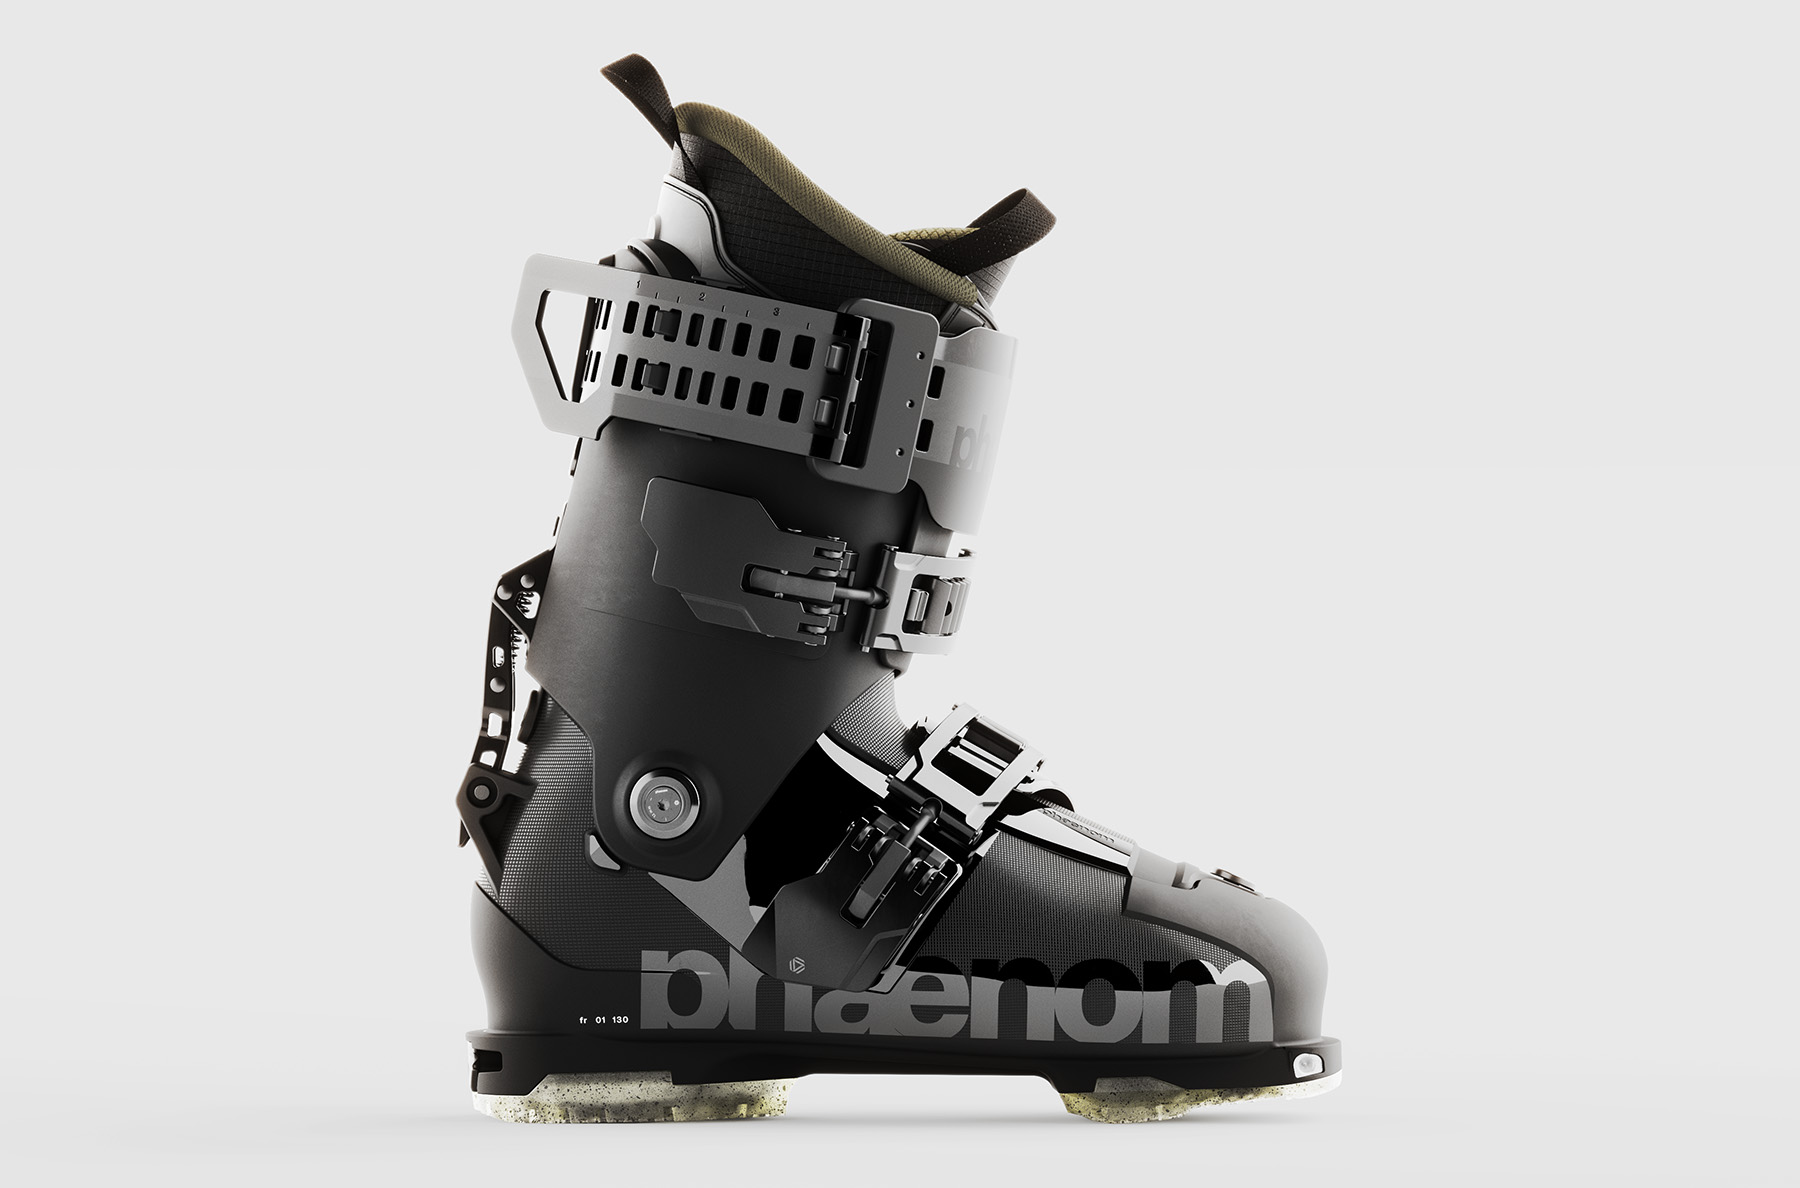 phaenom footwear launches ski boot collection | BLISTER discusses the details